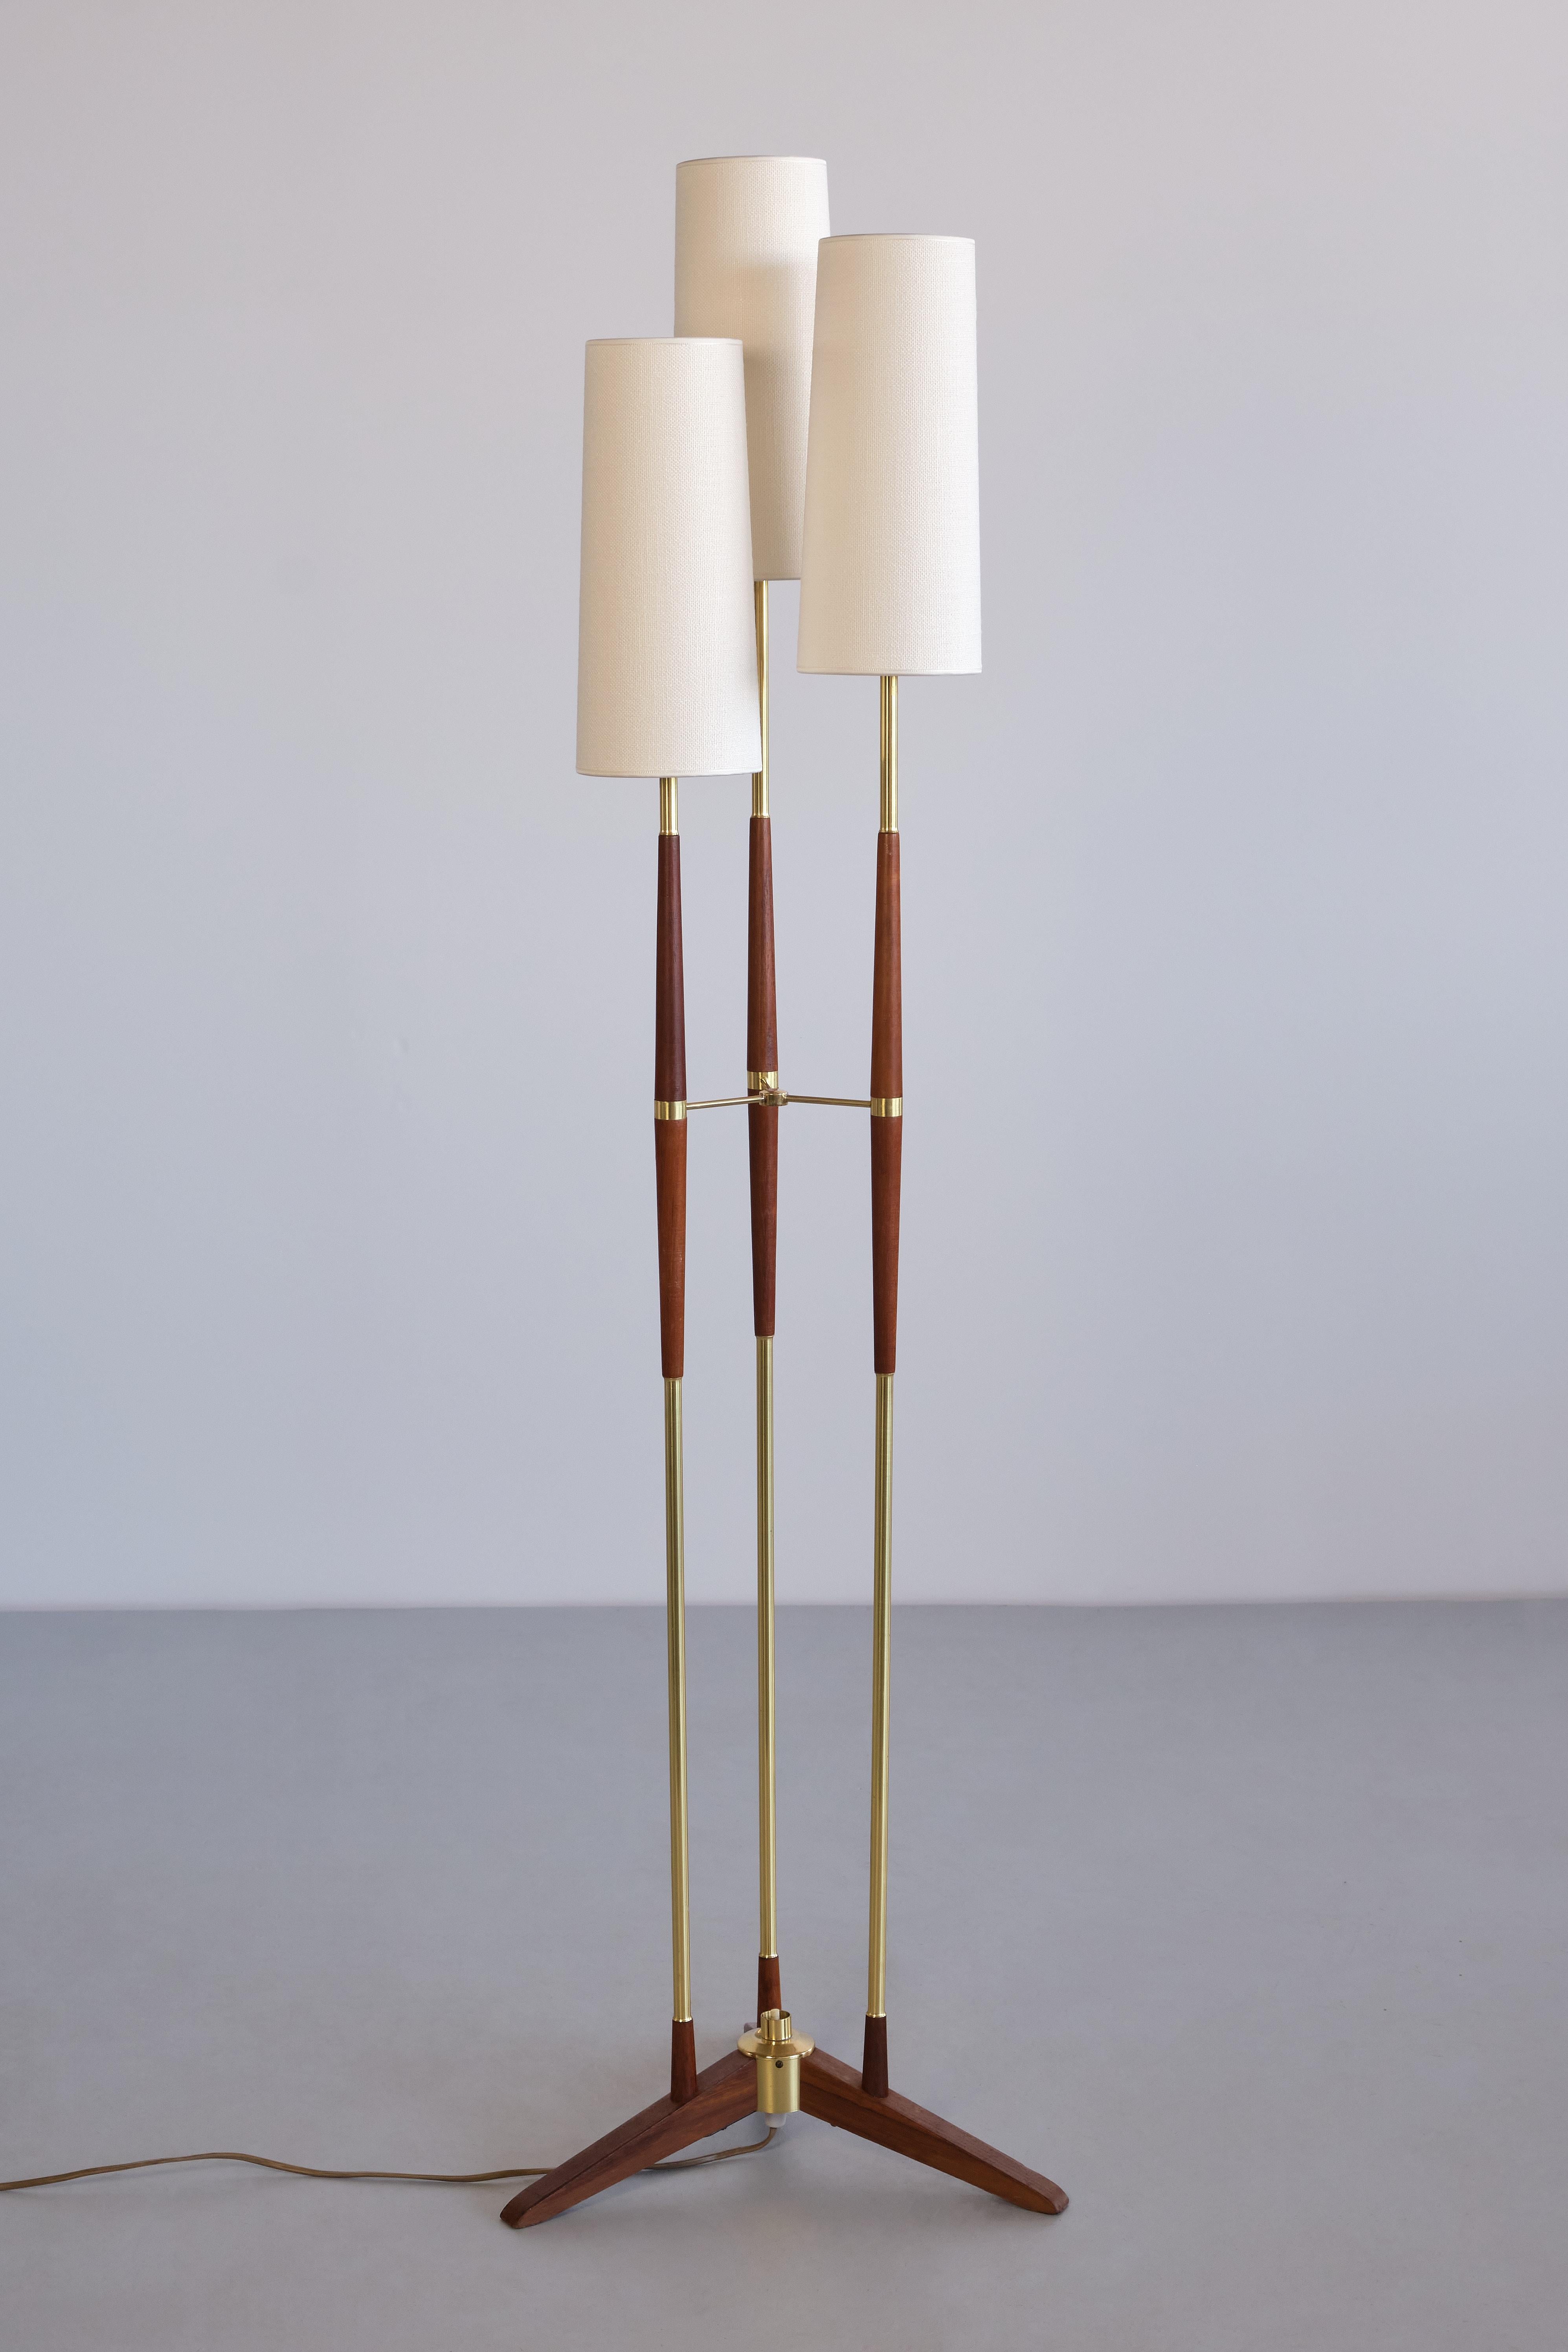 This rare floor lamp was produced by the Swedish manufacturer Möller Armatur in Eskiltuna in the late 1950s. The lamp is marked with the model number 80 and manufacturers stamp MAE on the bottom of the base.

The striking design is characterized by